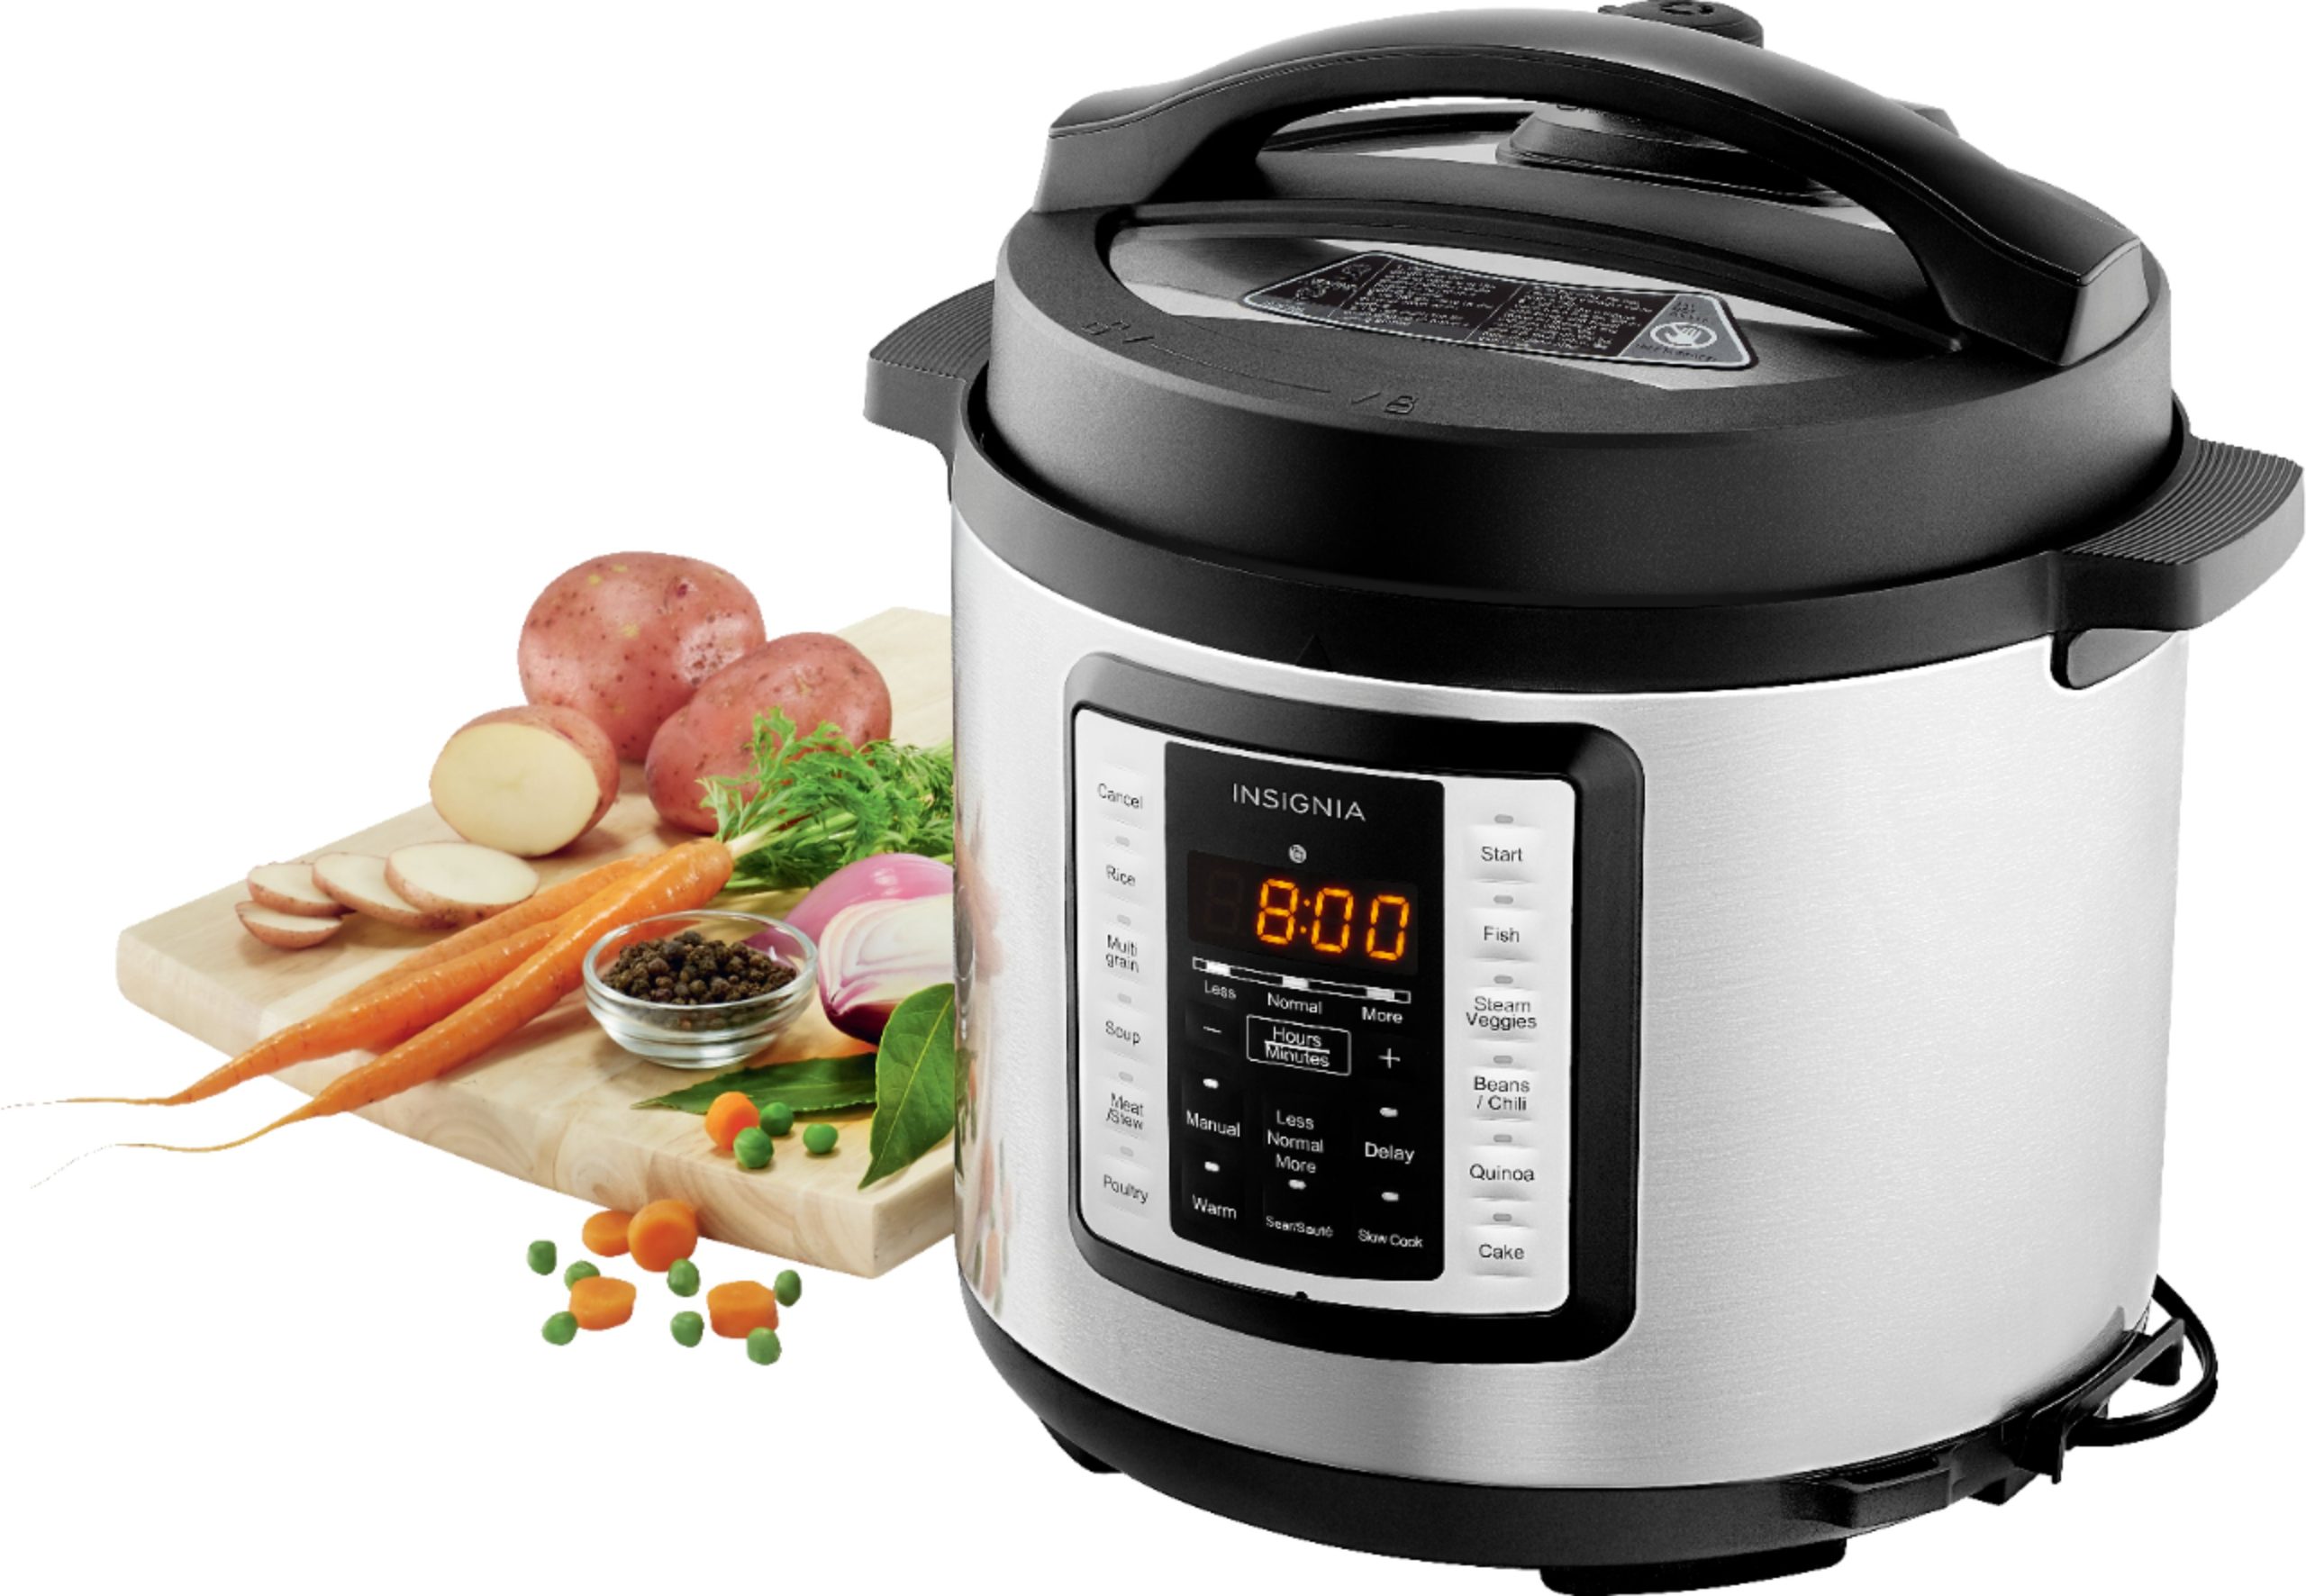 Insignia™ – 6qt Multi-Function Pressure Cooker – Stainless Steel – Just $29.99 at Best Buy